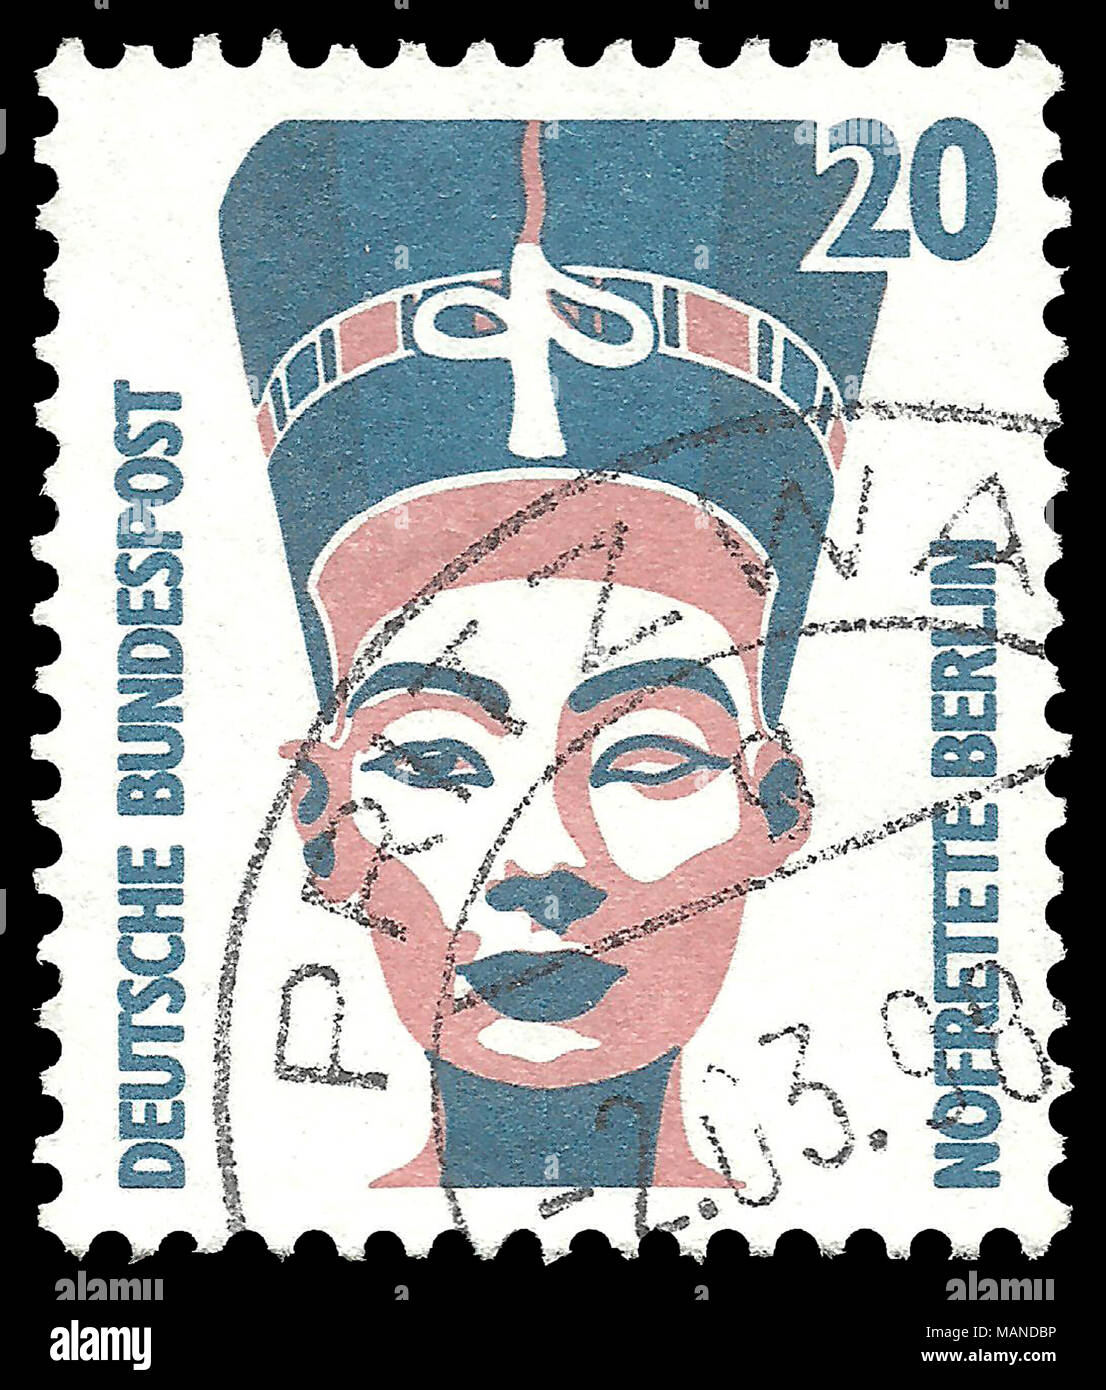 Germany - stamp 1994: Edition on Royal families, shows Nefertiti Bust Stock Photo